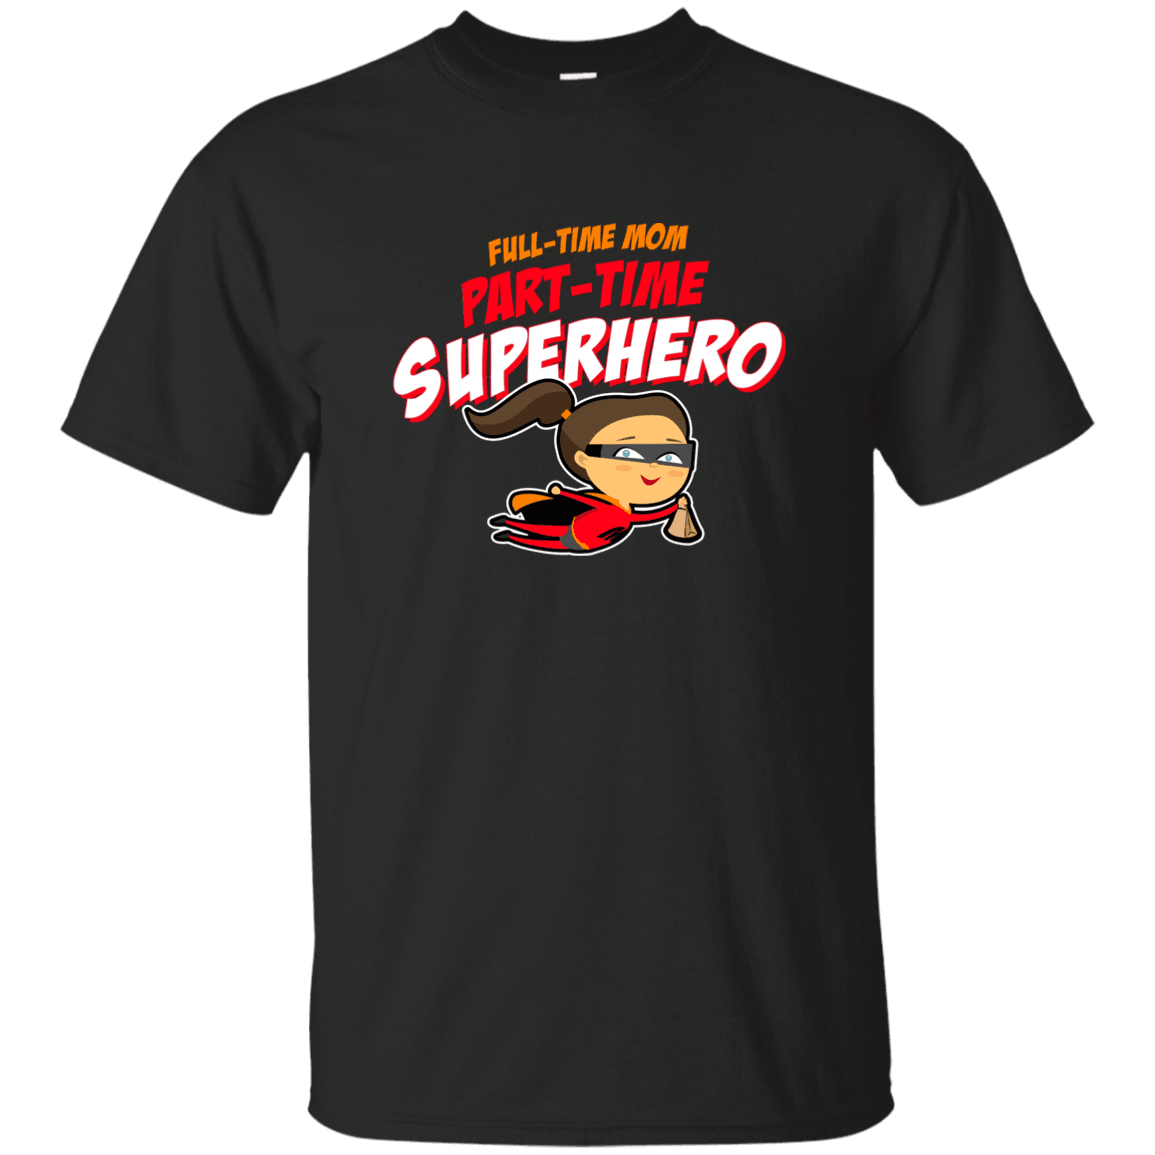 Designs by MyUtopia Shout Out:Full-time Mom Part-Time Superhero Ultra Cotton T-Shirt,Black / S,Adult Unisex T-Shirt